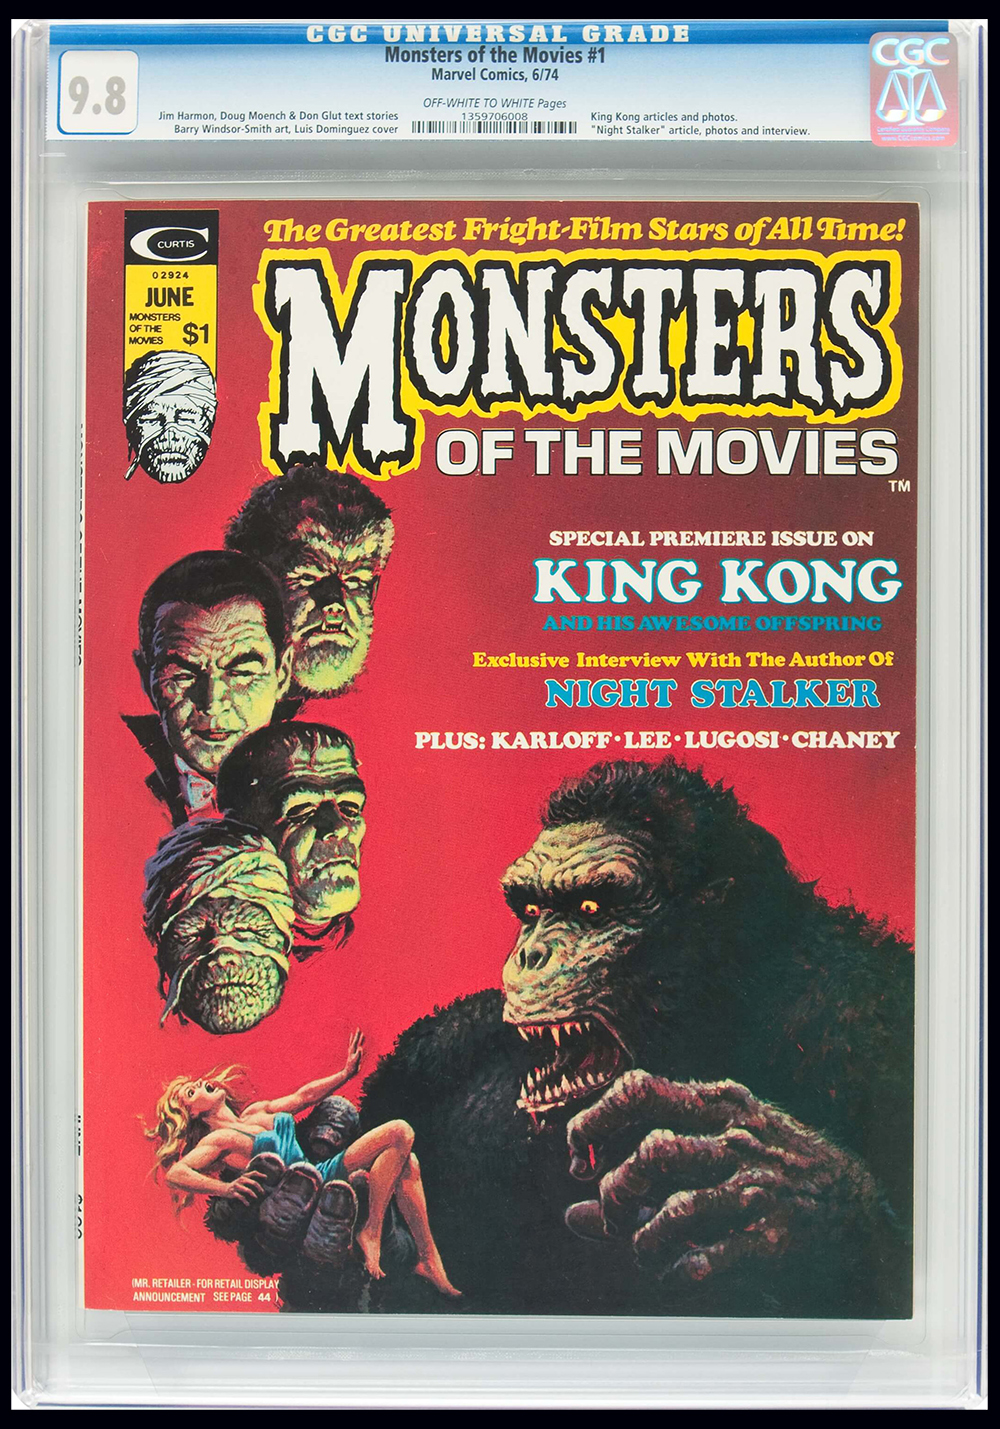 Image: Monsters of the Movies